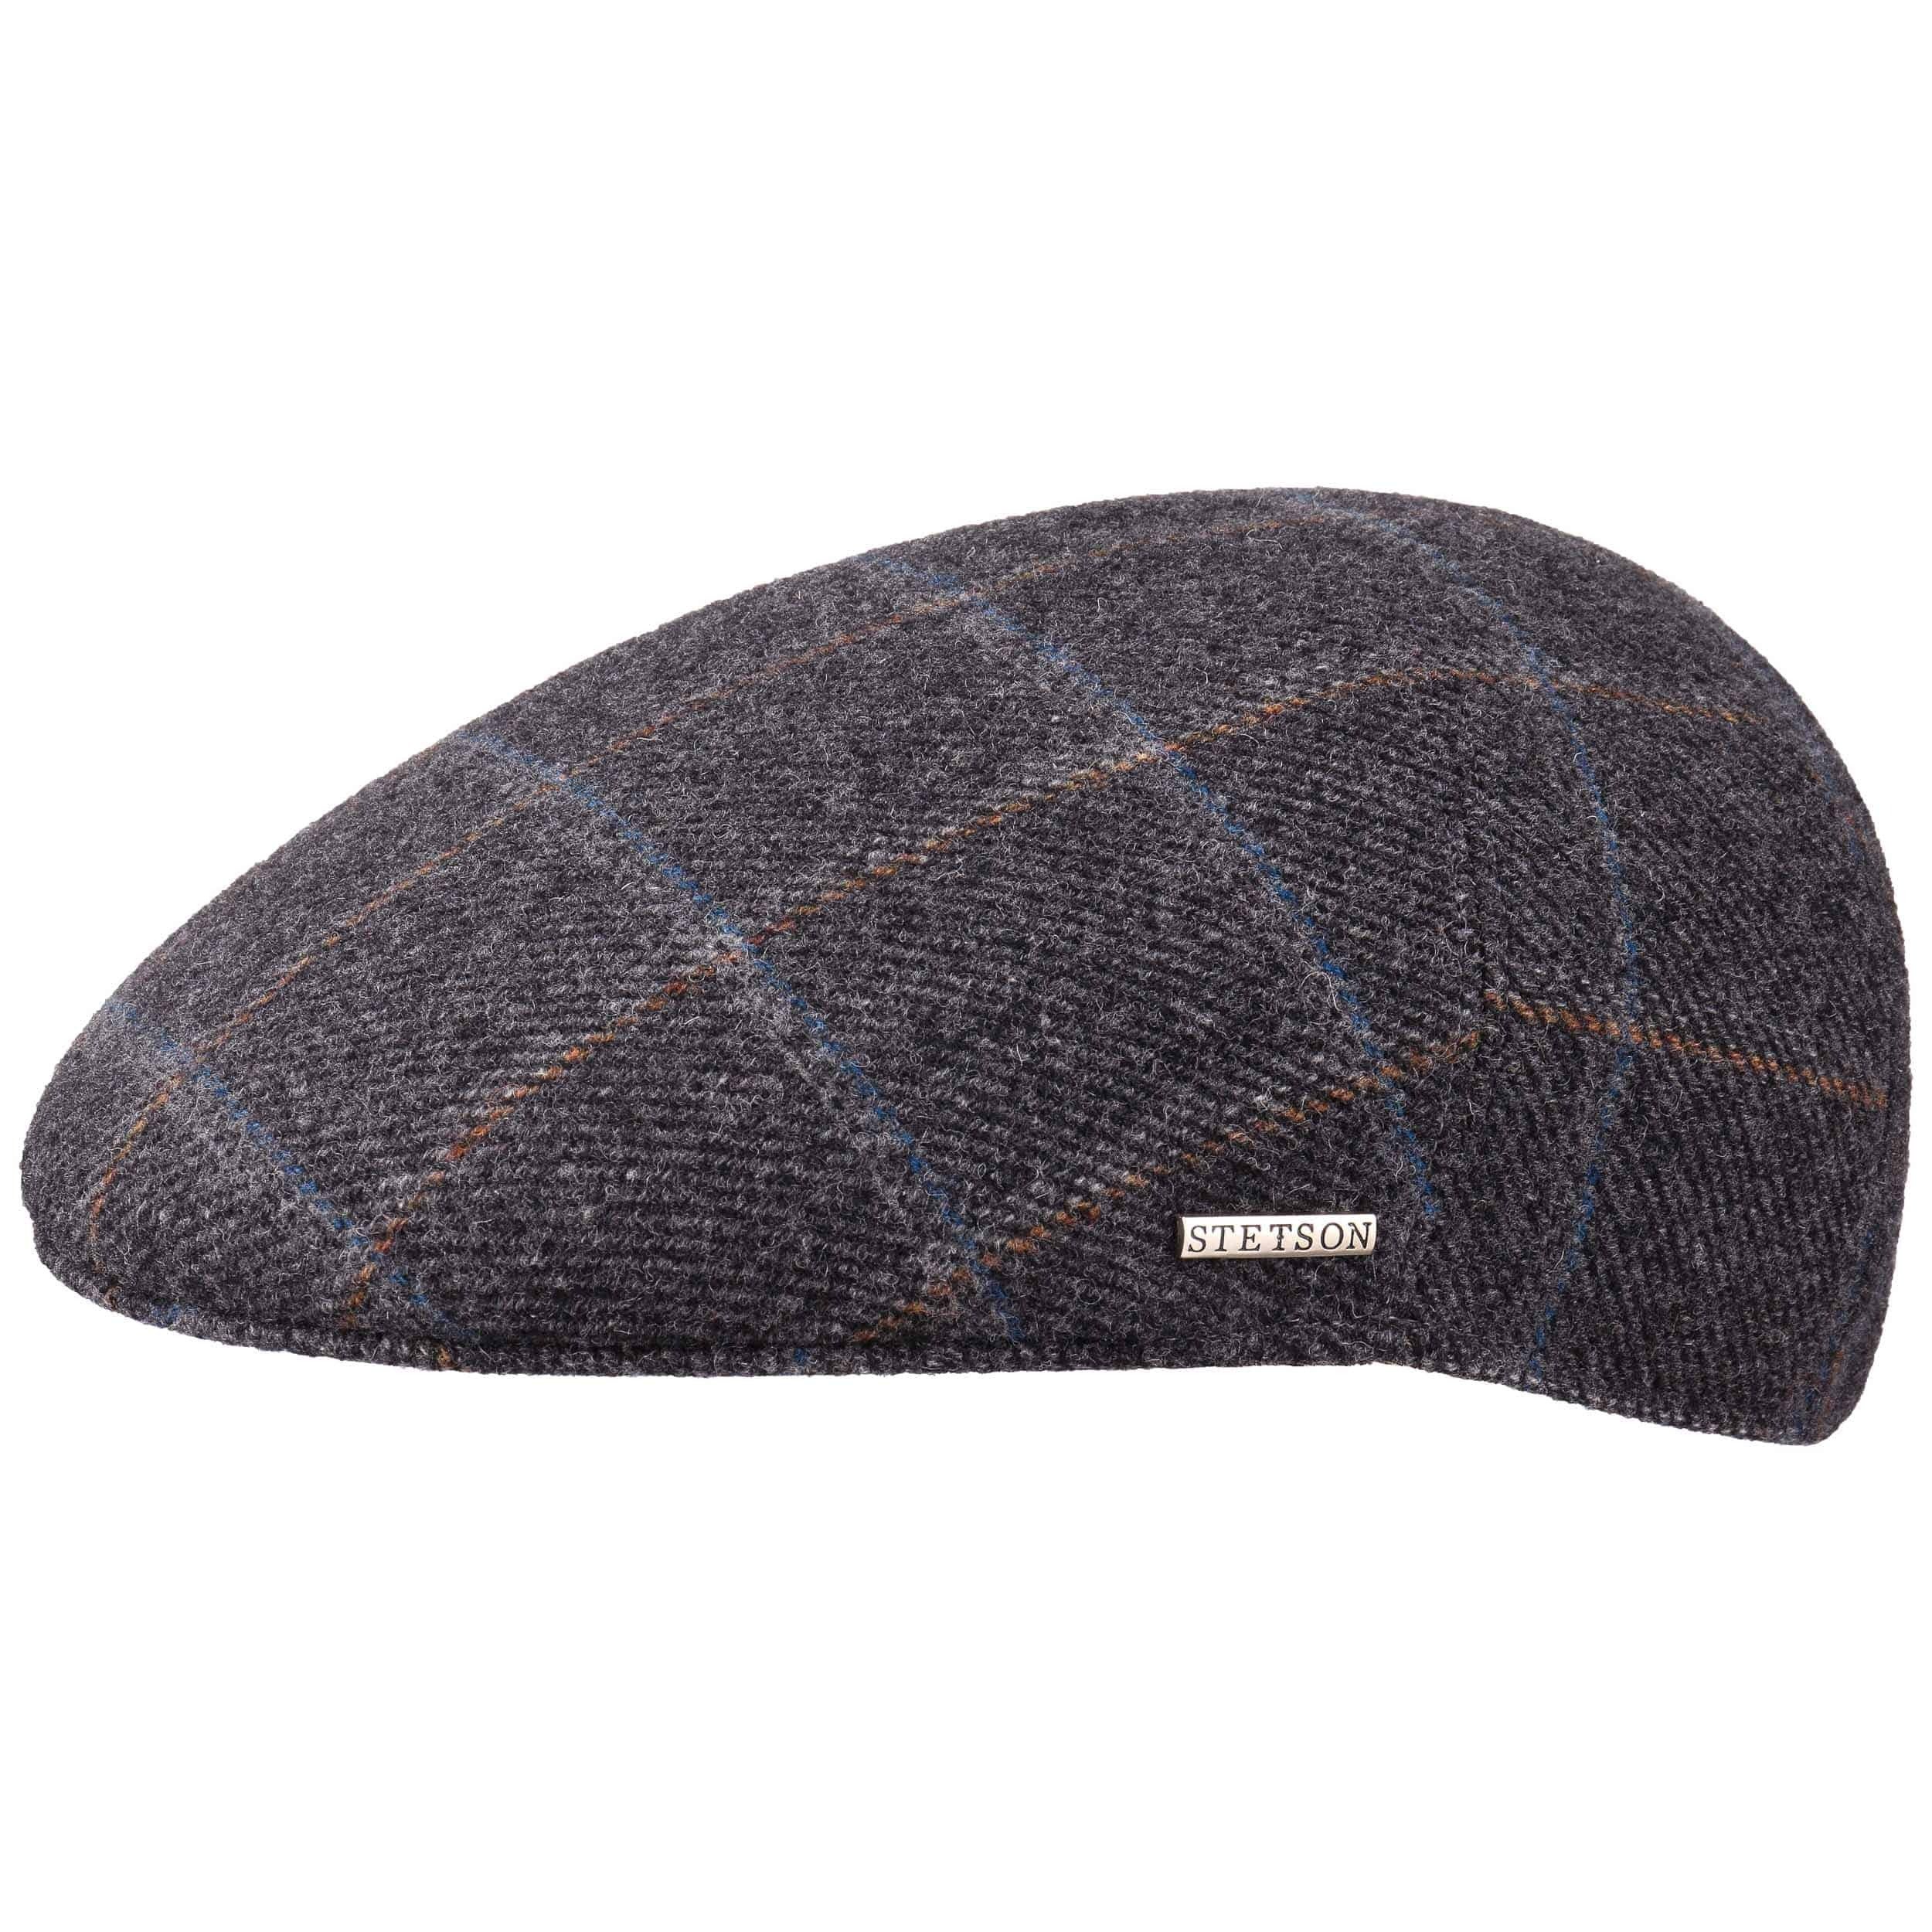 Casquette Plate Sussex Wool by Stetson - 59,00 €